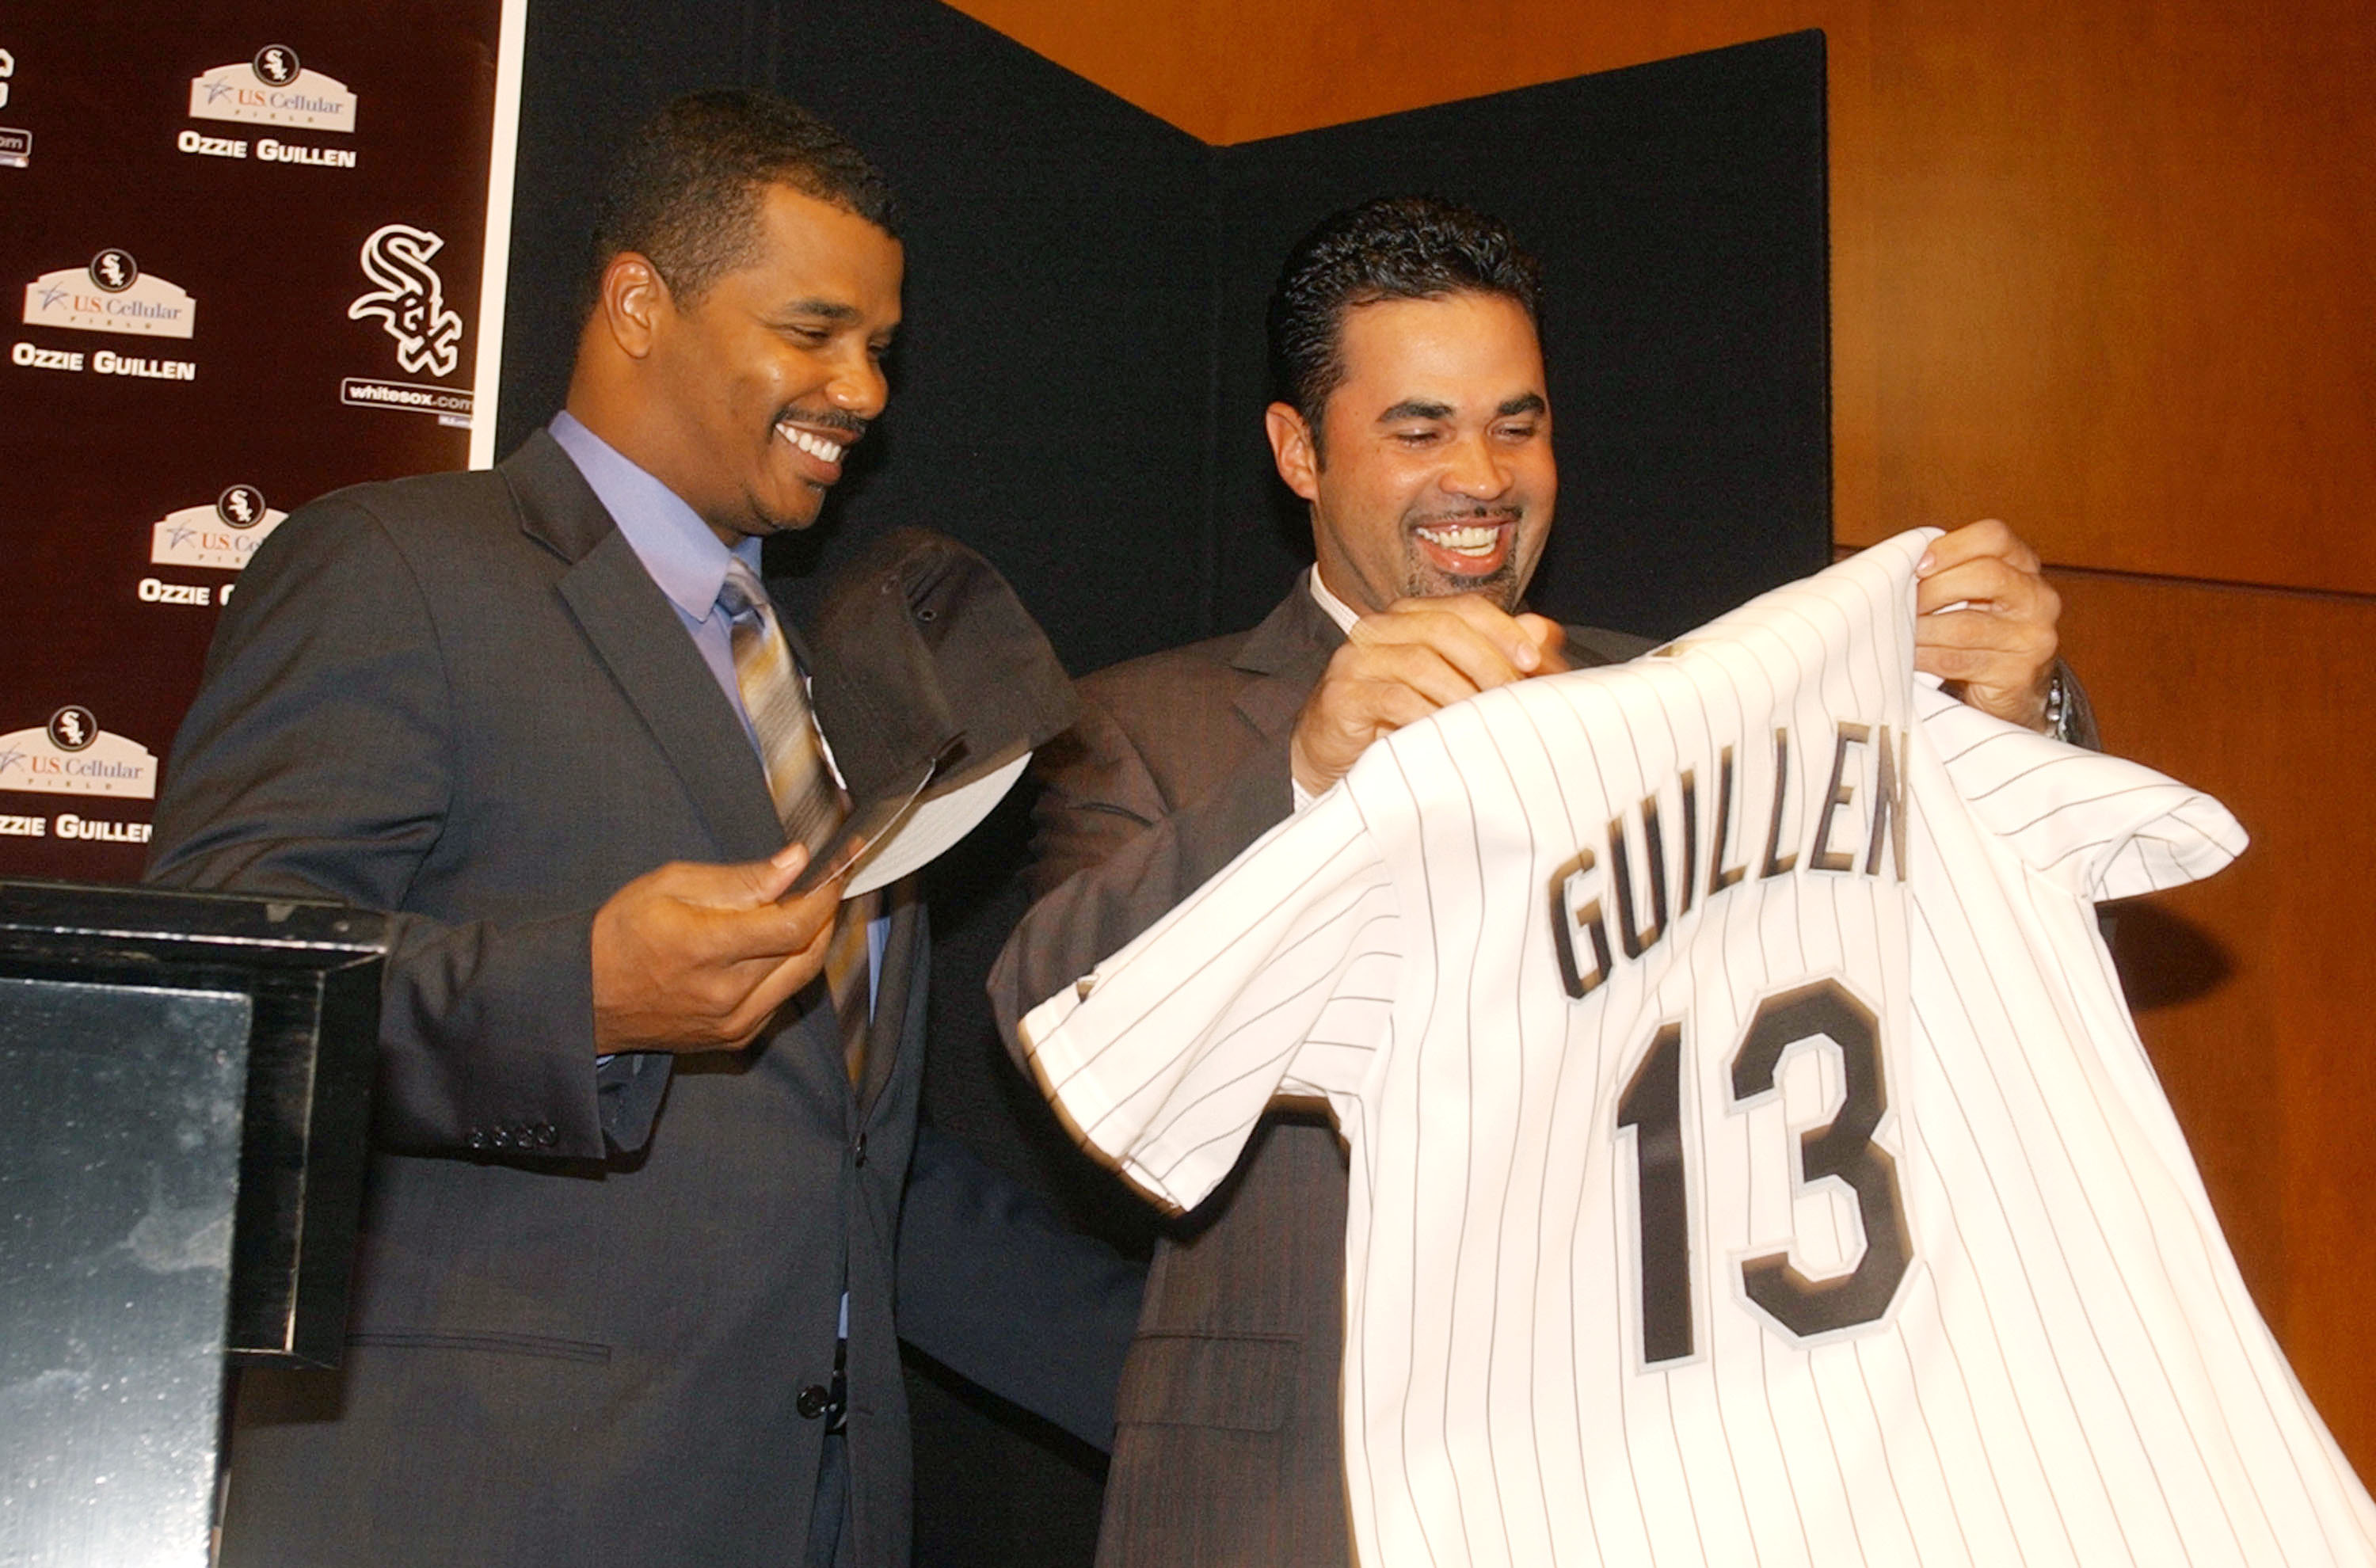 Guillen named White Sox manager